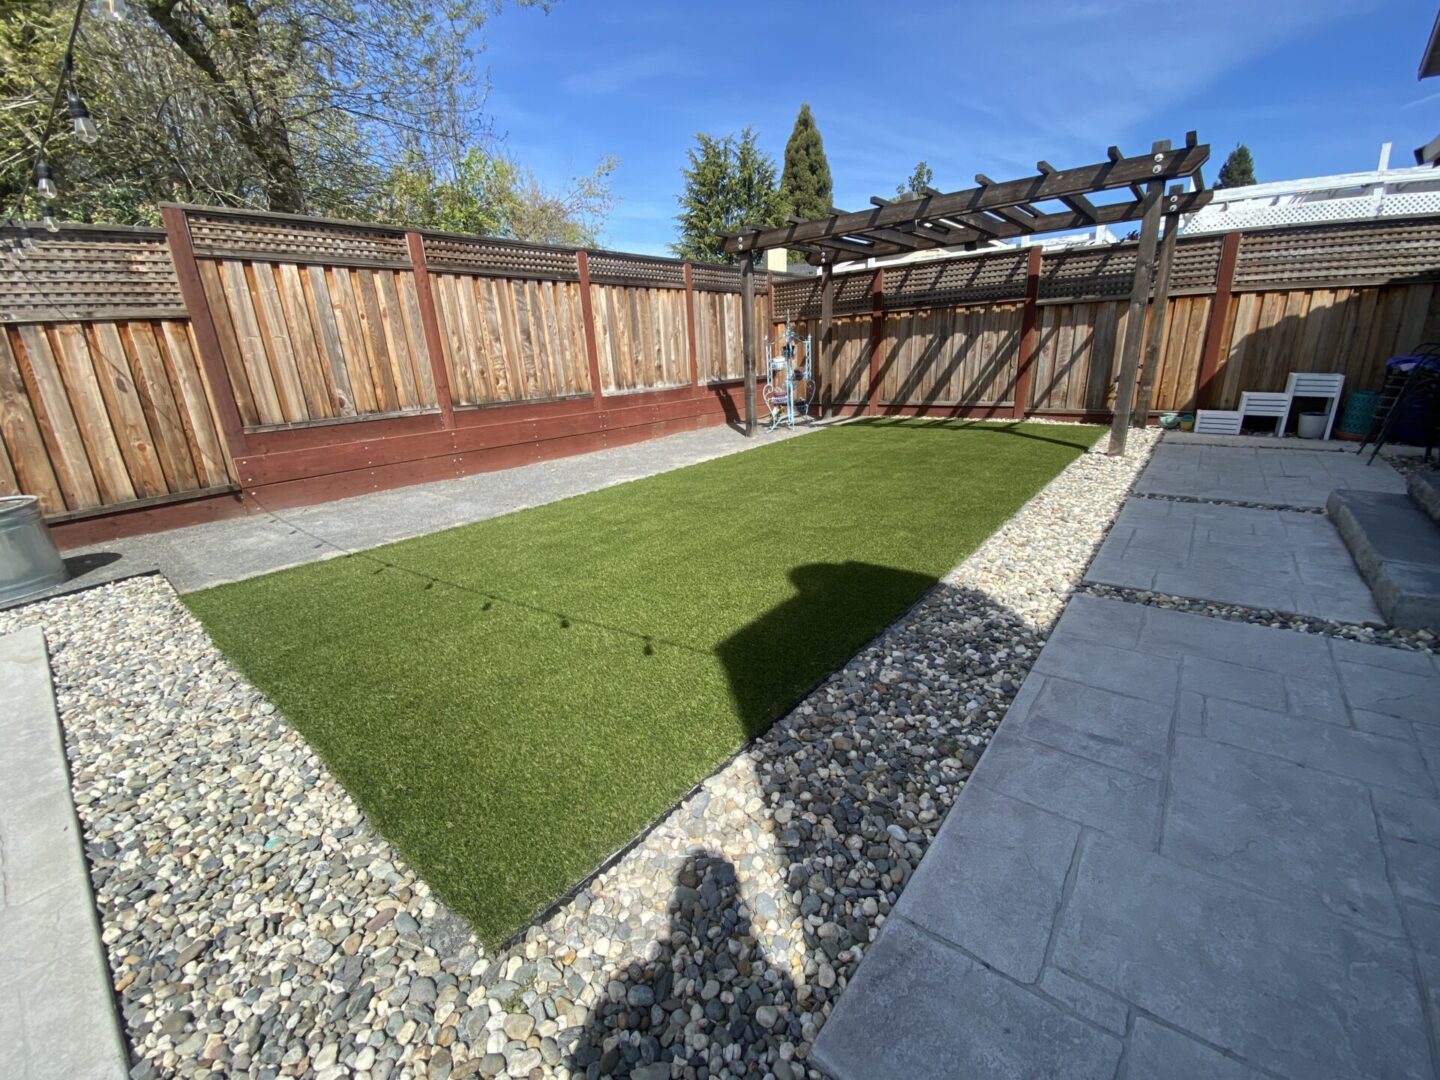 Artificial grass, pebbles, gazebo, landscaping by Guys Yard Design in Sonoma, CA